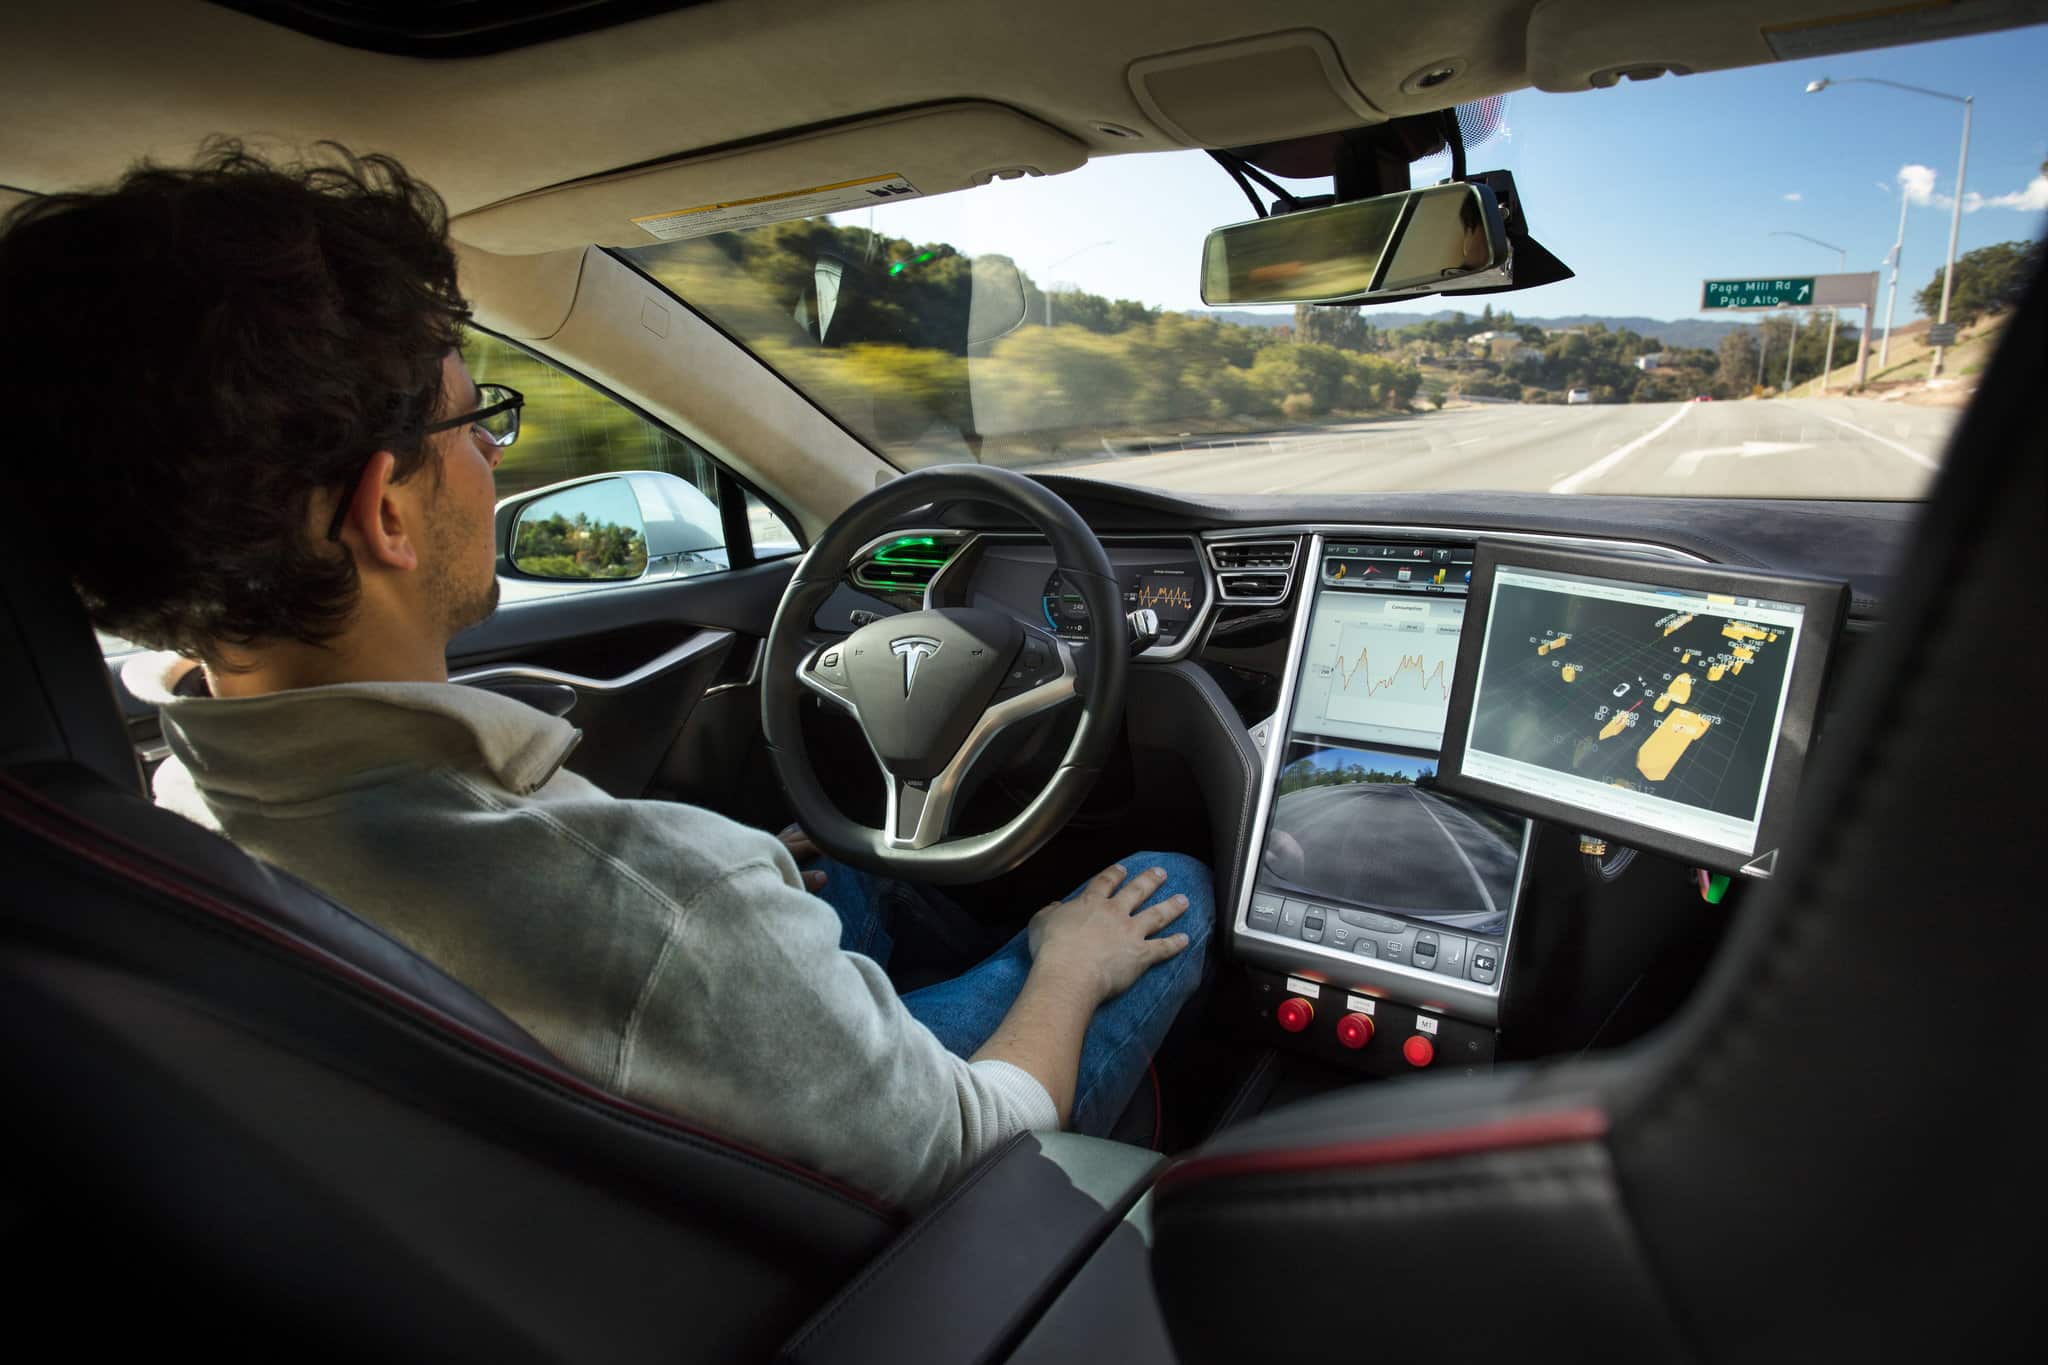 The Moral & Ethical Considerations Of SelfDriving Vehicles